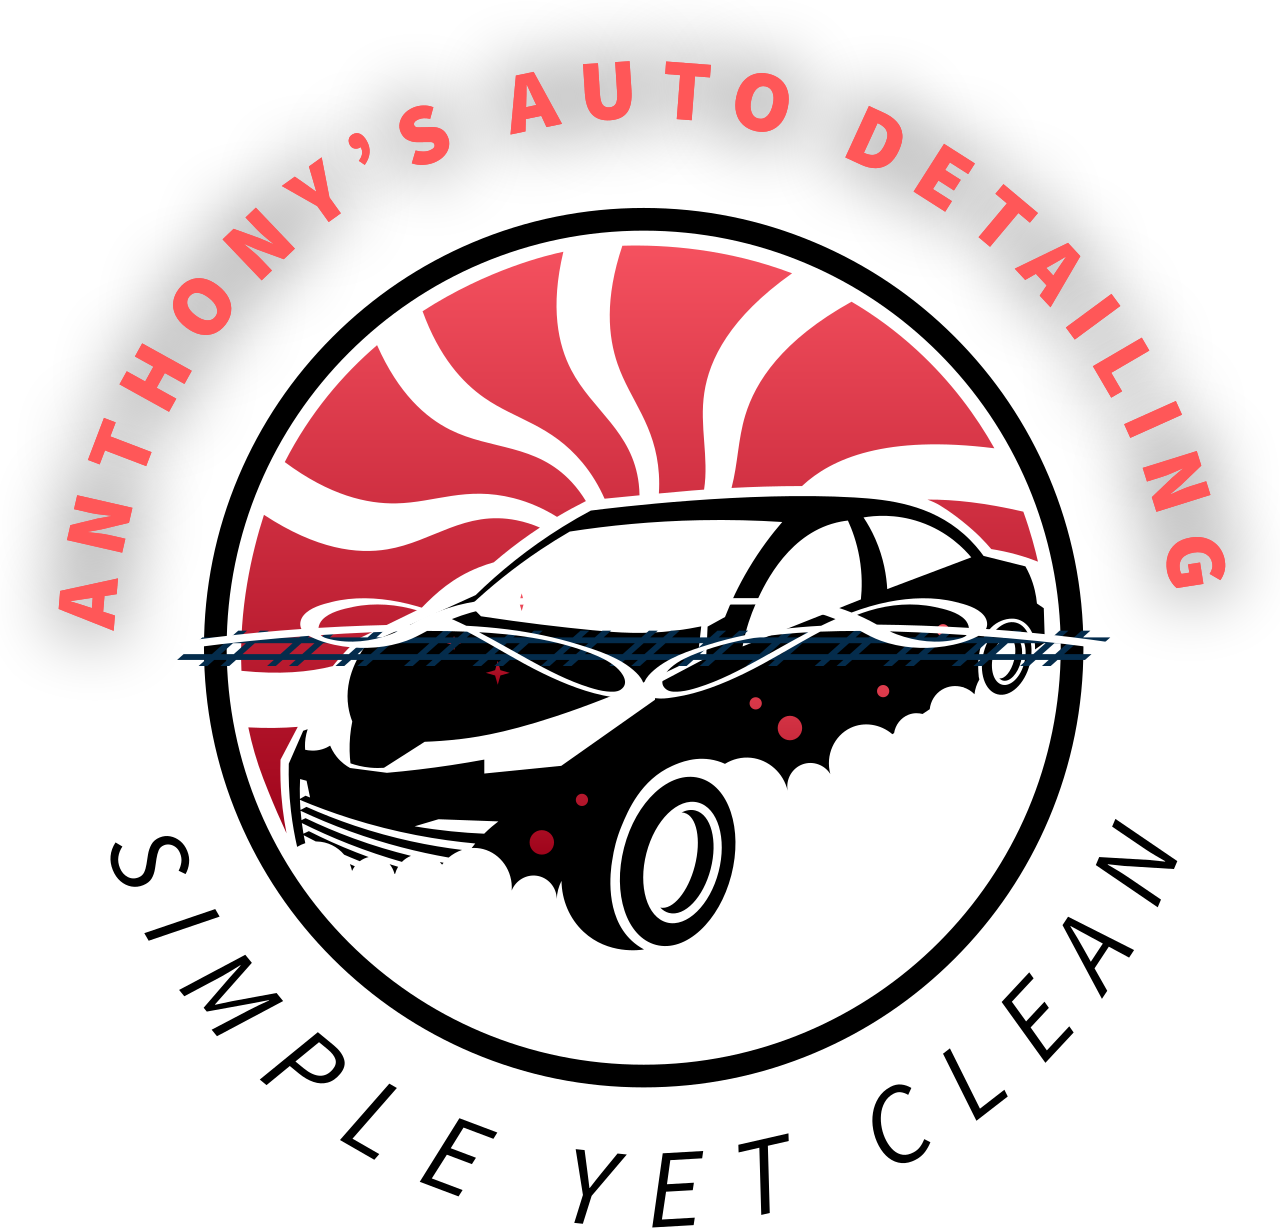 ANTHONY’S AUTO DETAILING 's web page